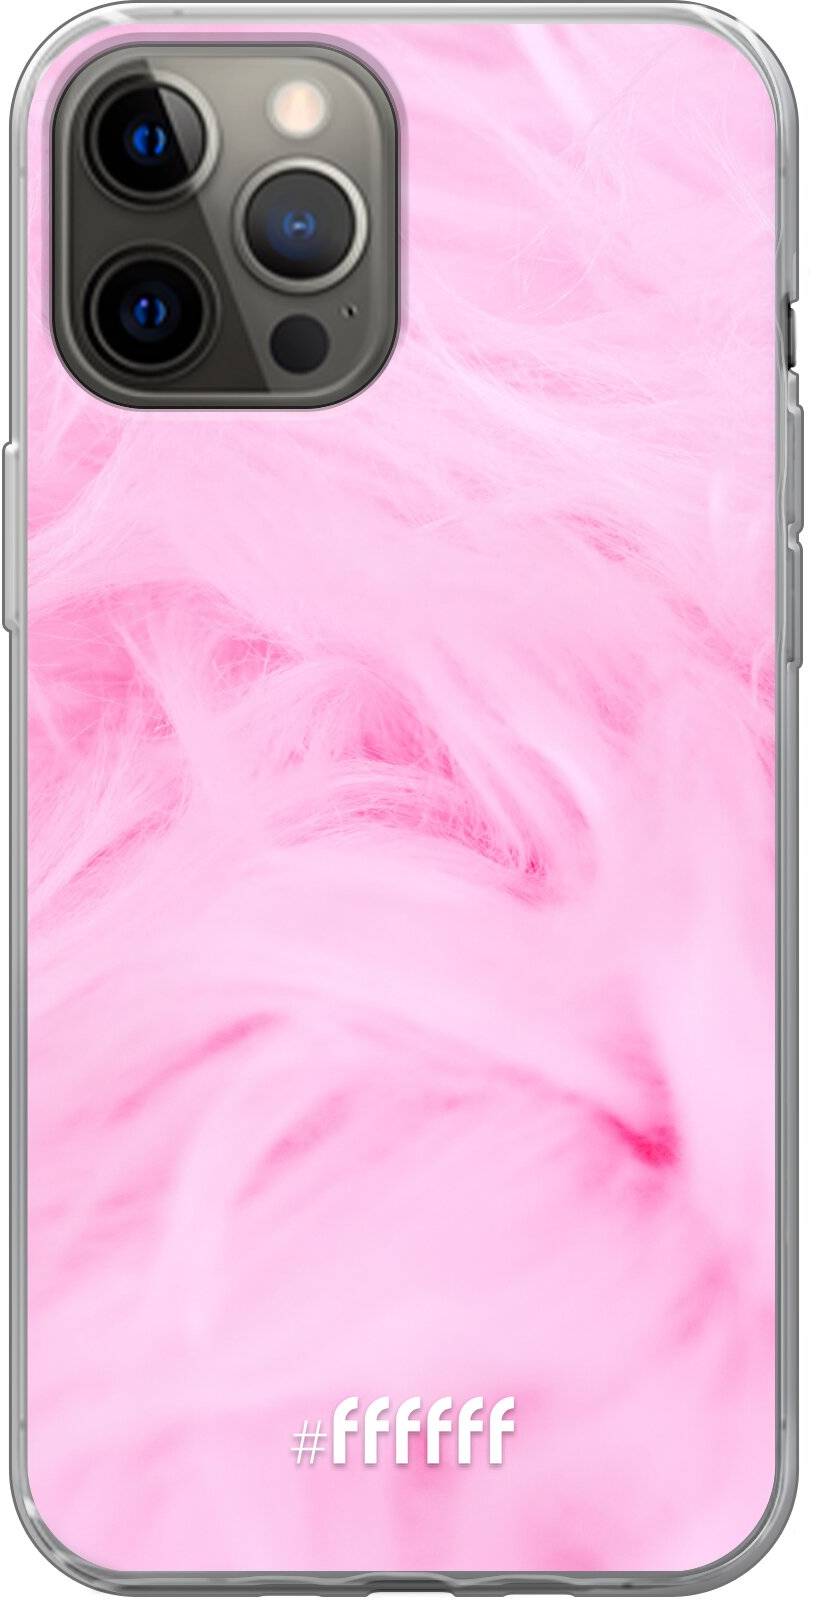 Cotton Candy iPhone 12 Pro Max